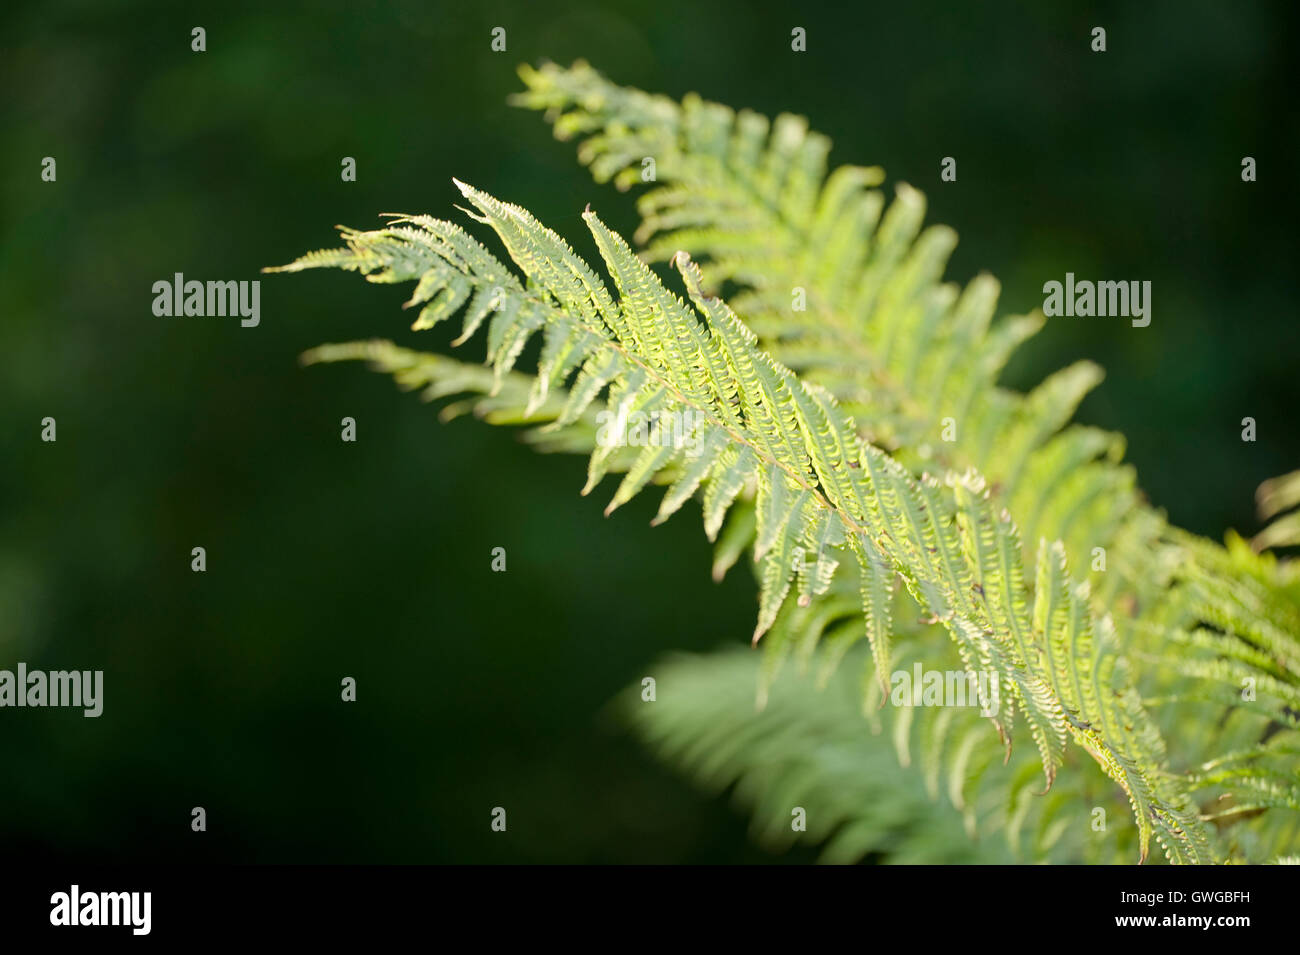 Scaly Male Fern (Dryopteris affinis), fronds. Germany Stock Photo